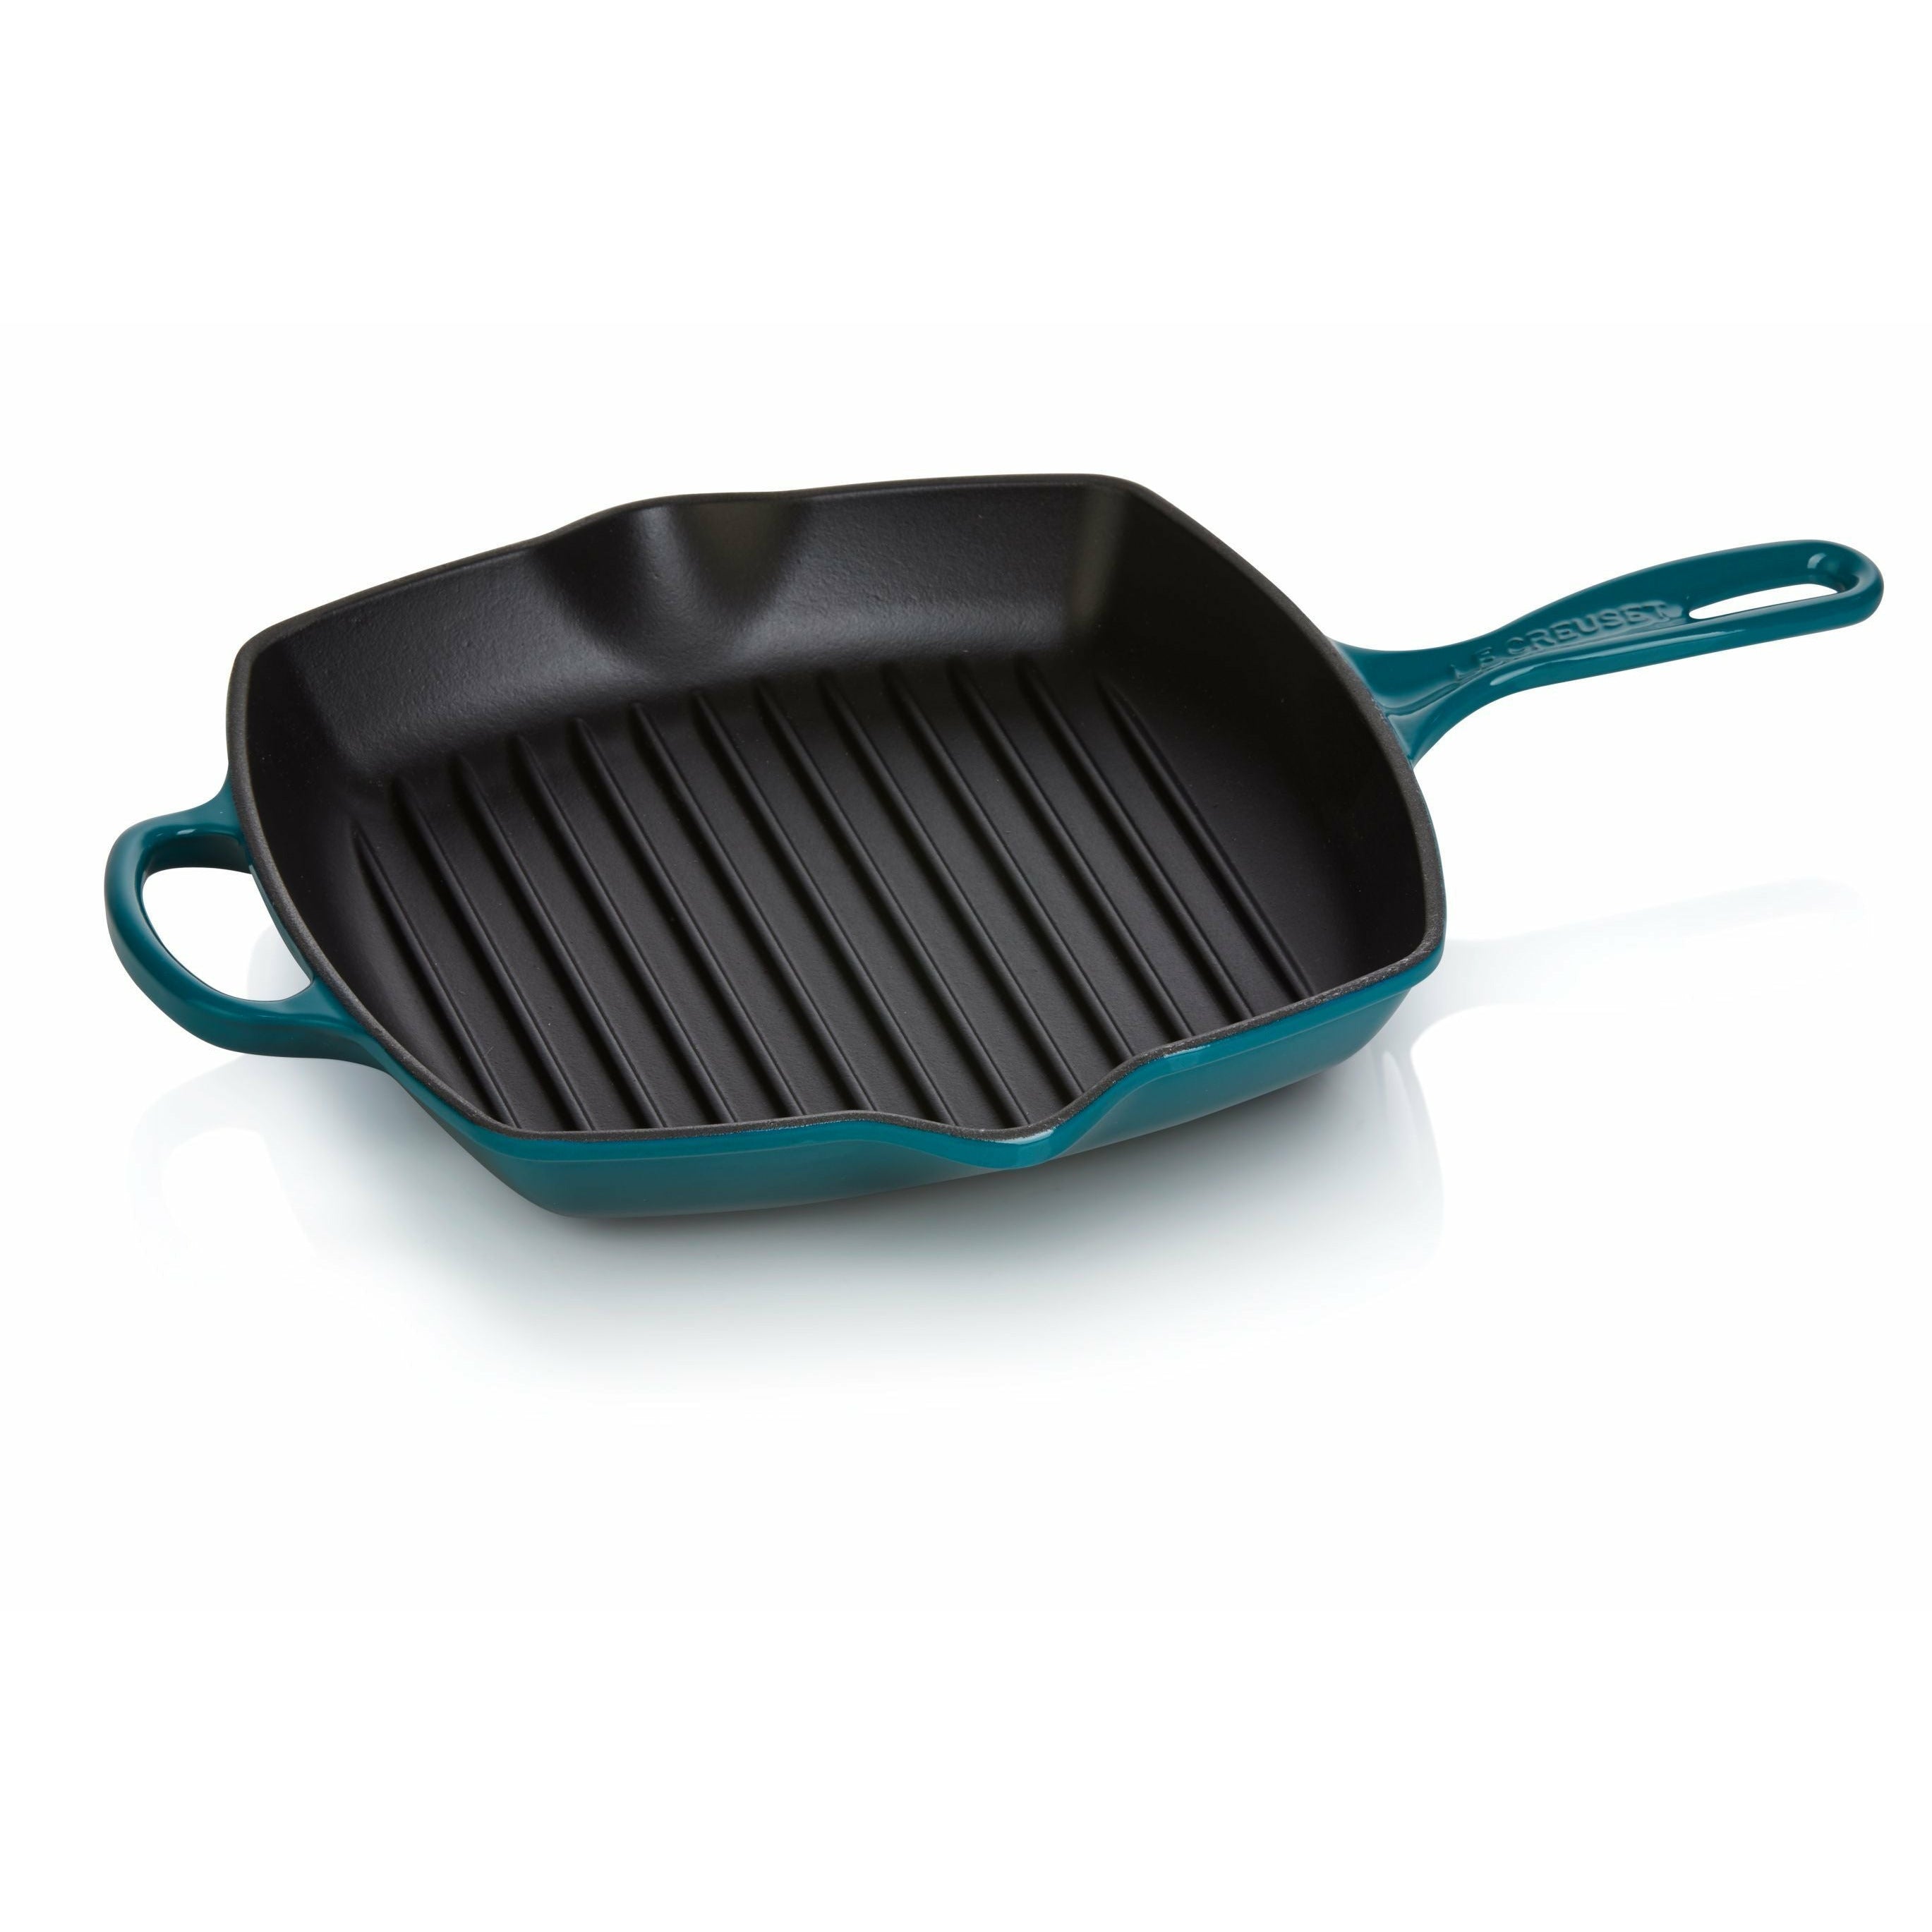 Le Creuset Nature Square Grill Pan 26 cm, dyb teal